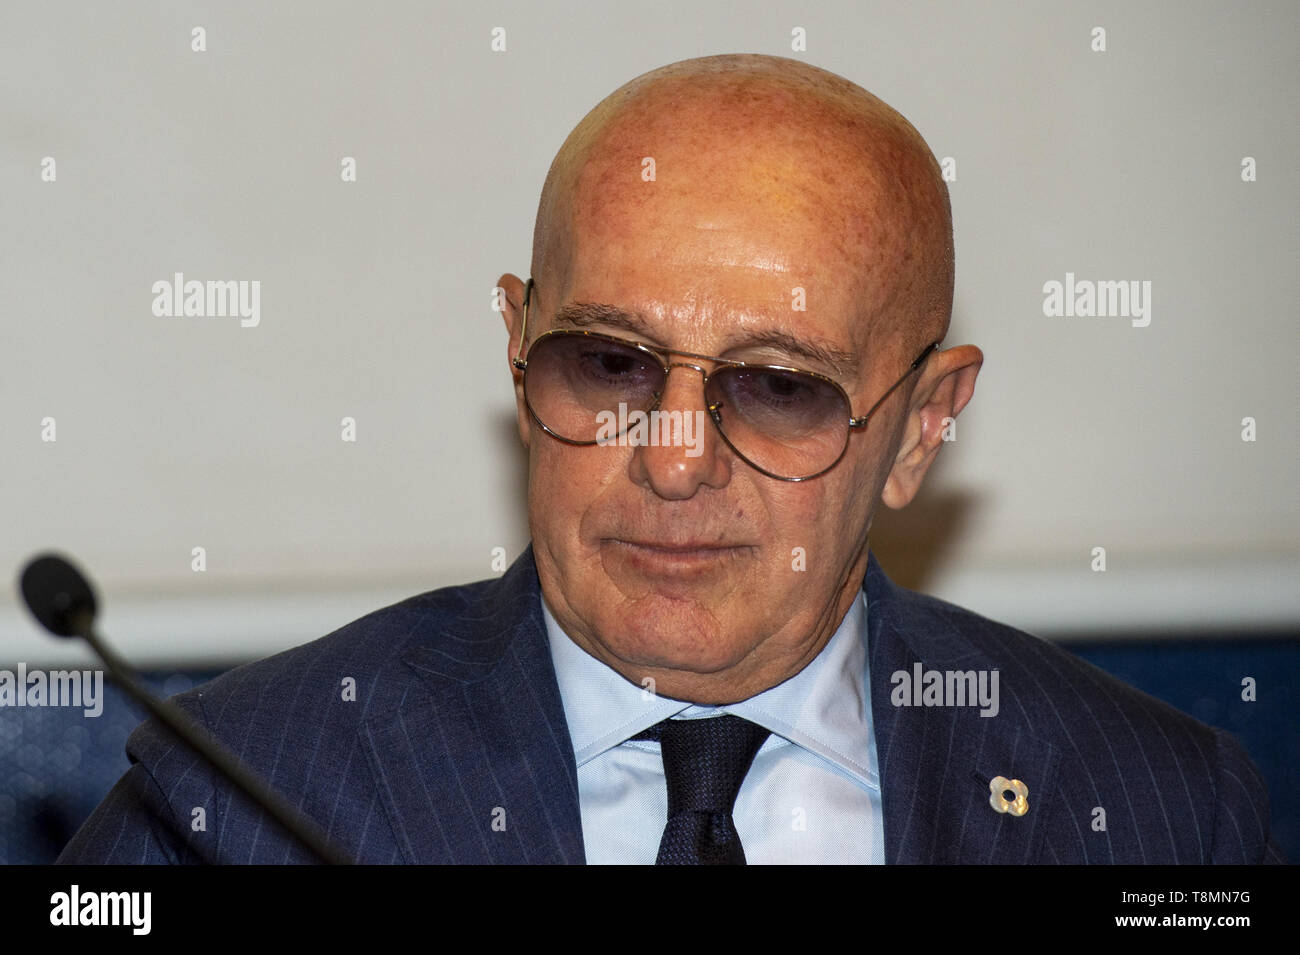 Arrigo Sacchi, guest during the XXXII Turin International Book Fair at Lingotto Fiere on May 13, 2019 in Turin, Italy. (Photo by Antonio Polia / Pacific Press) Stock Photo